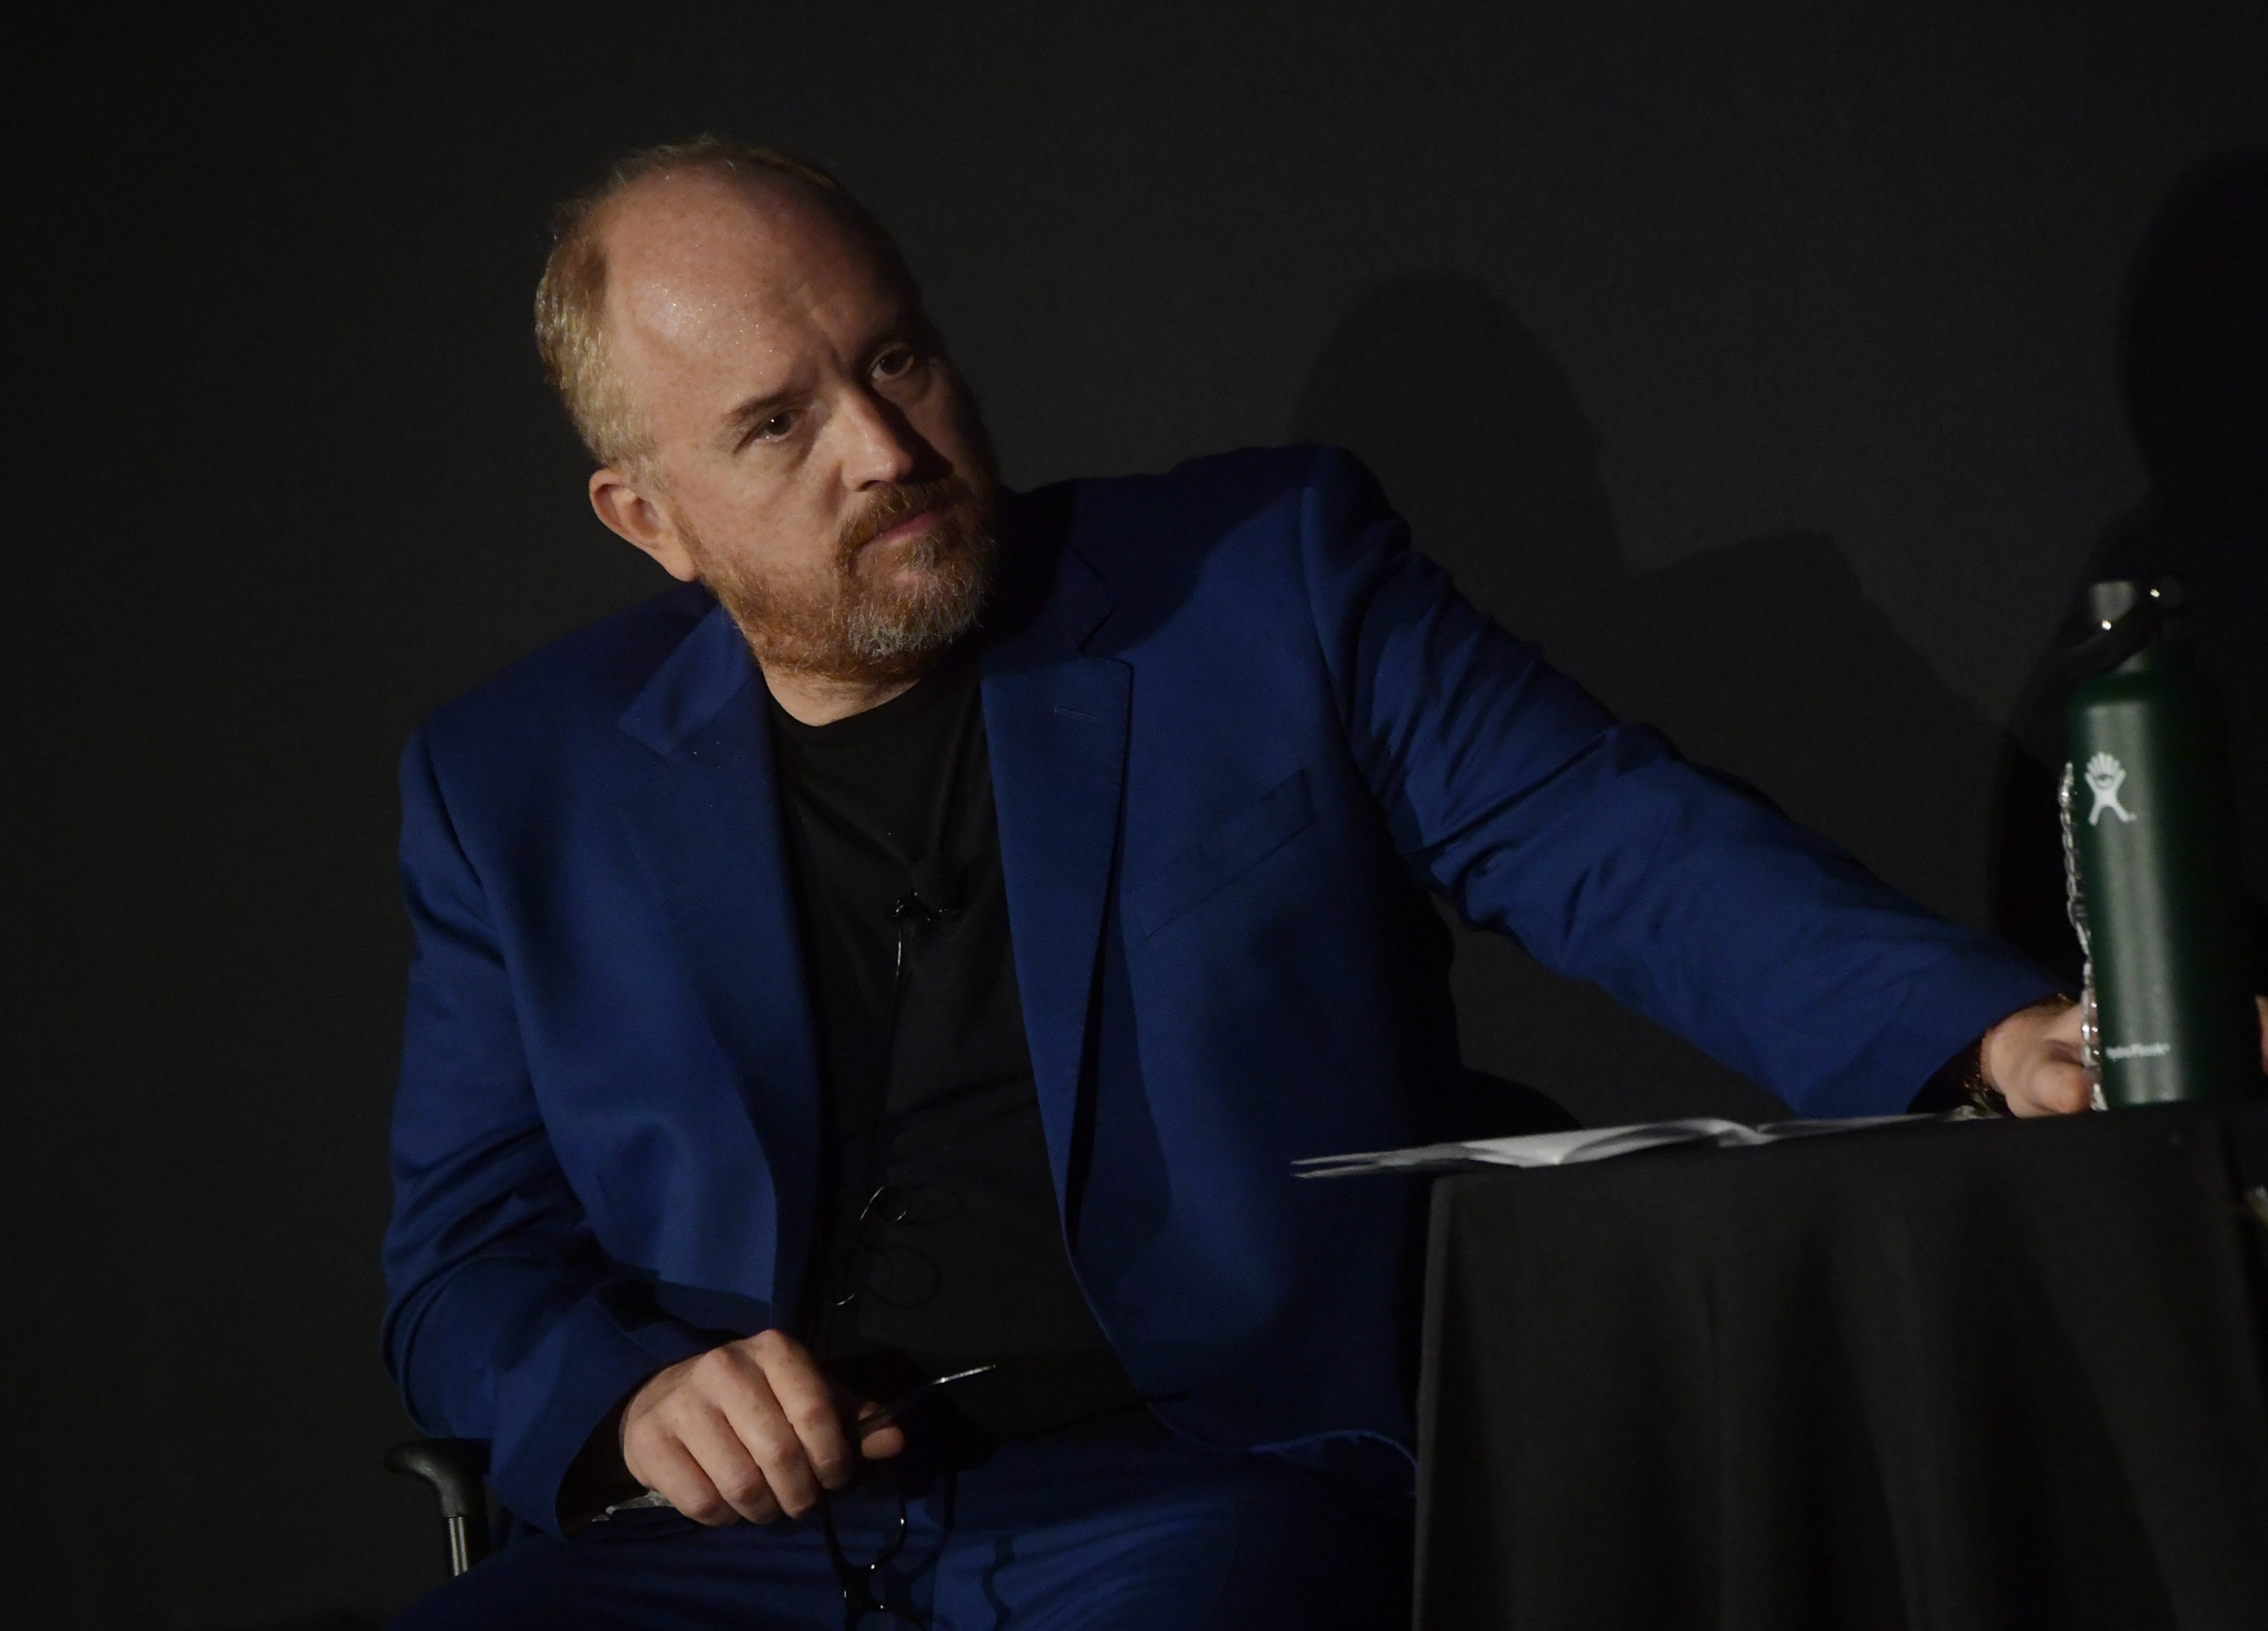 Louis CK mocks non-binary people and Parkland shooting in new material